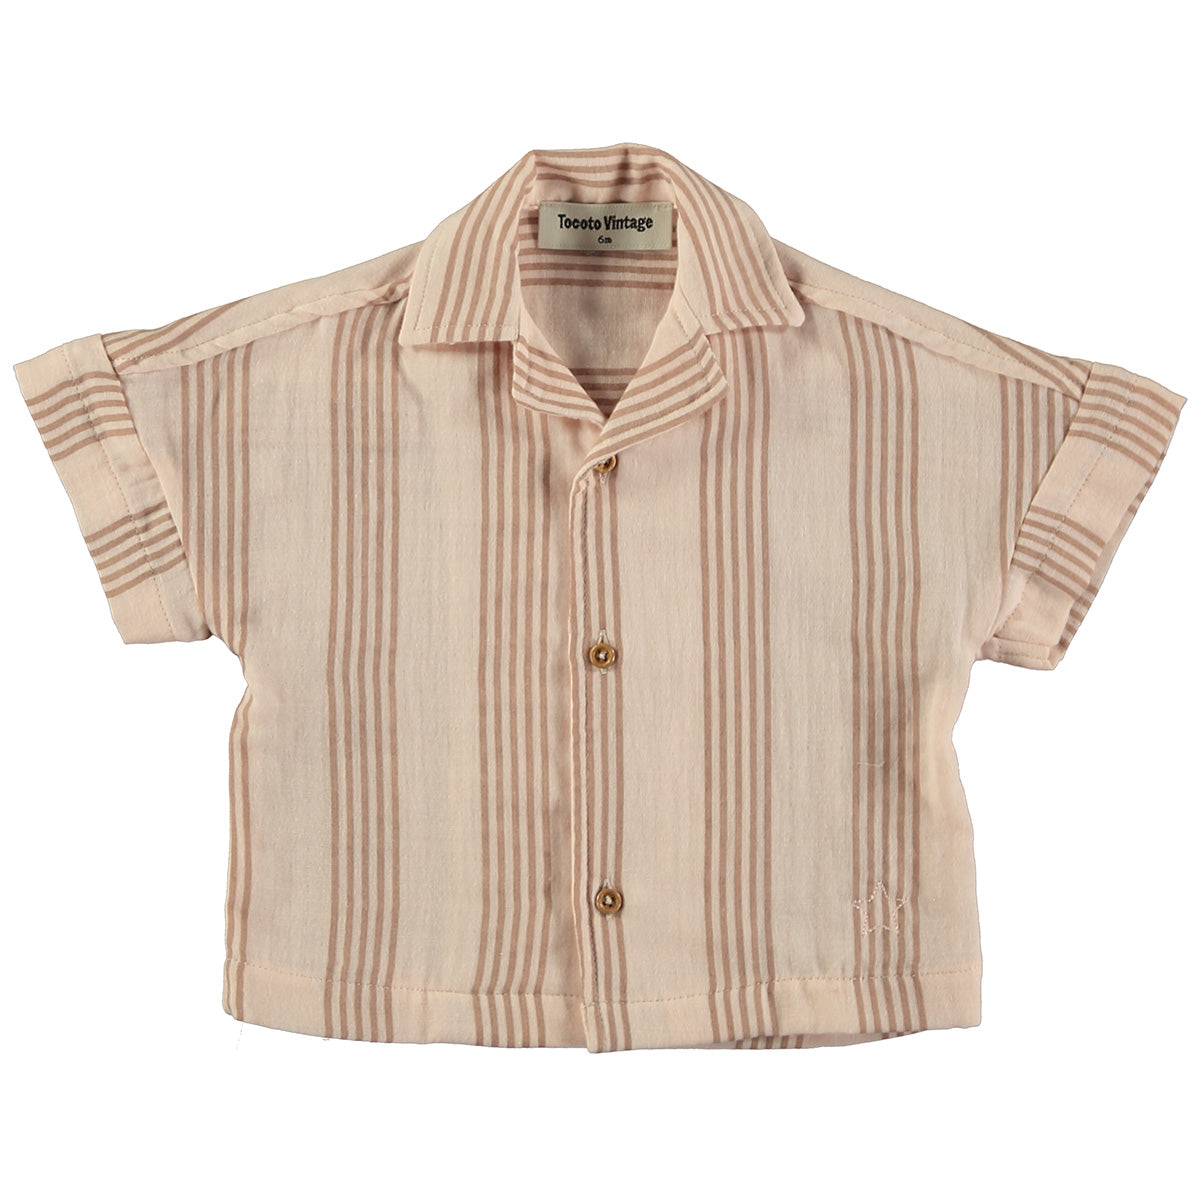 The Oversize Resort Shirt Striped from Tocoto Vintage. Short sleeve resort style baby shirt with striped print.